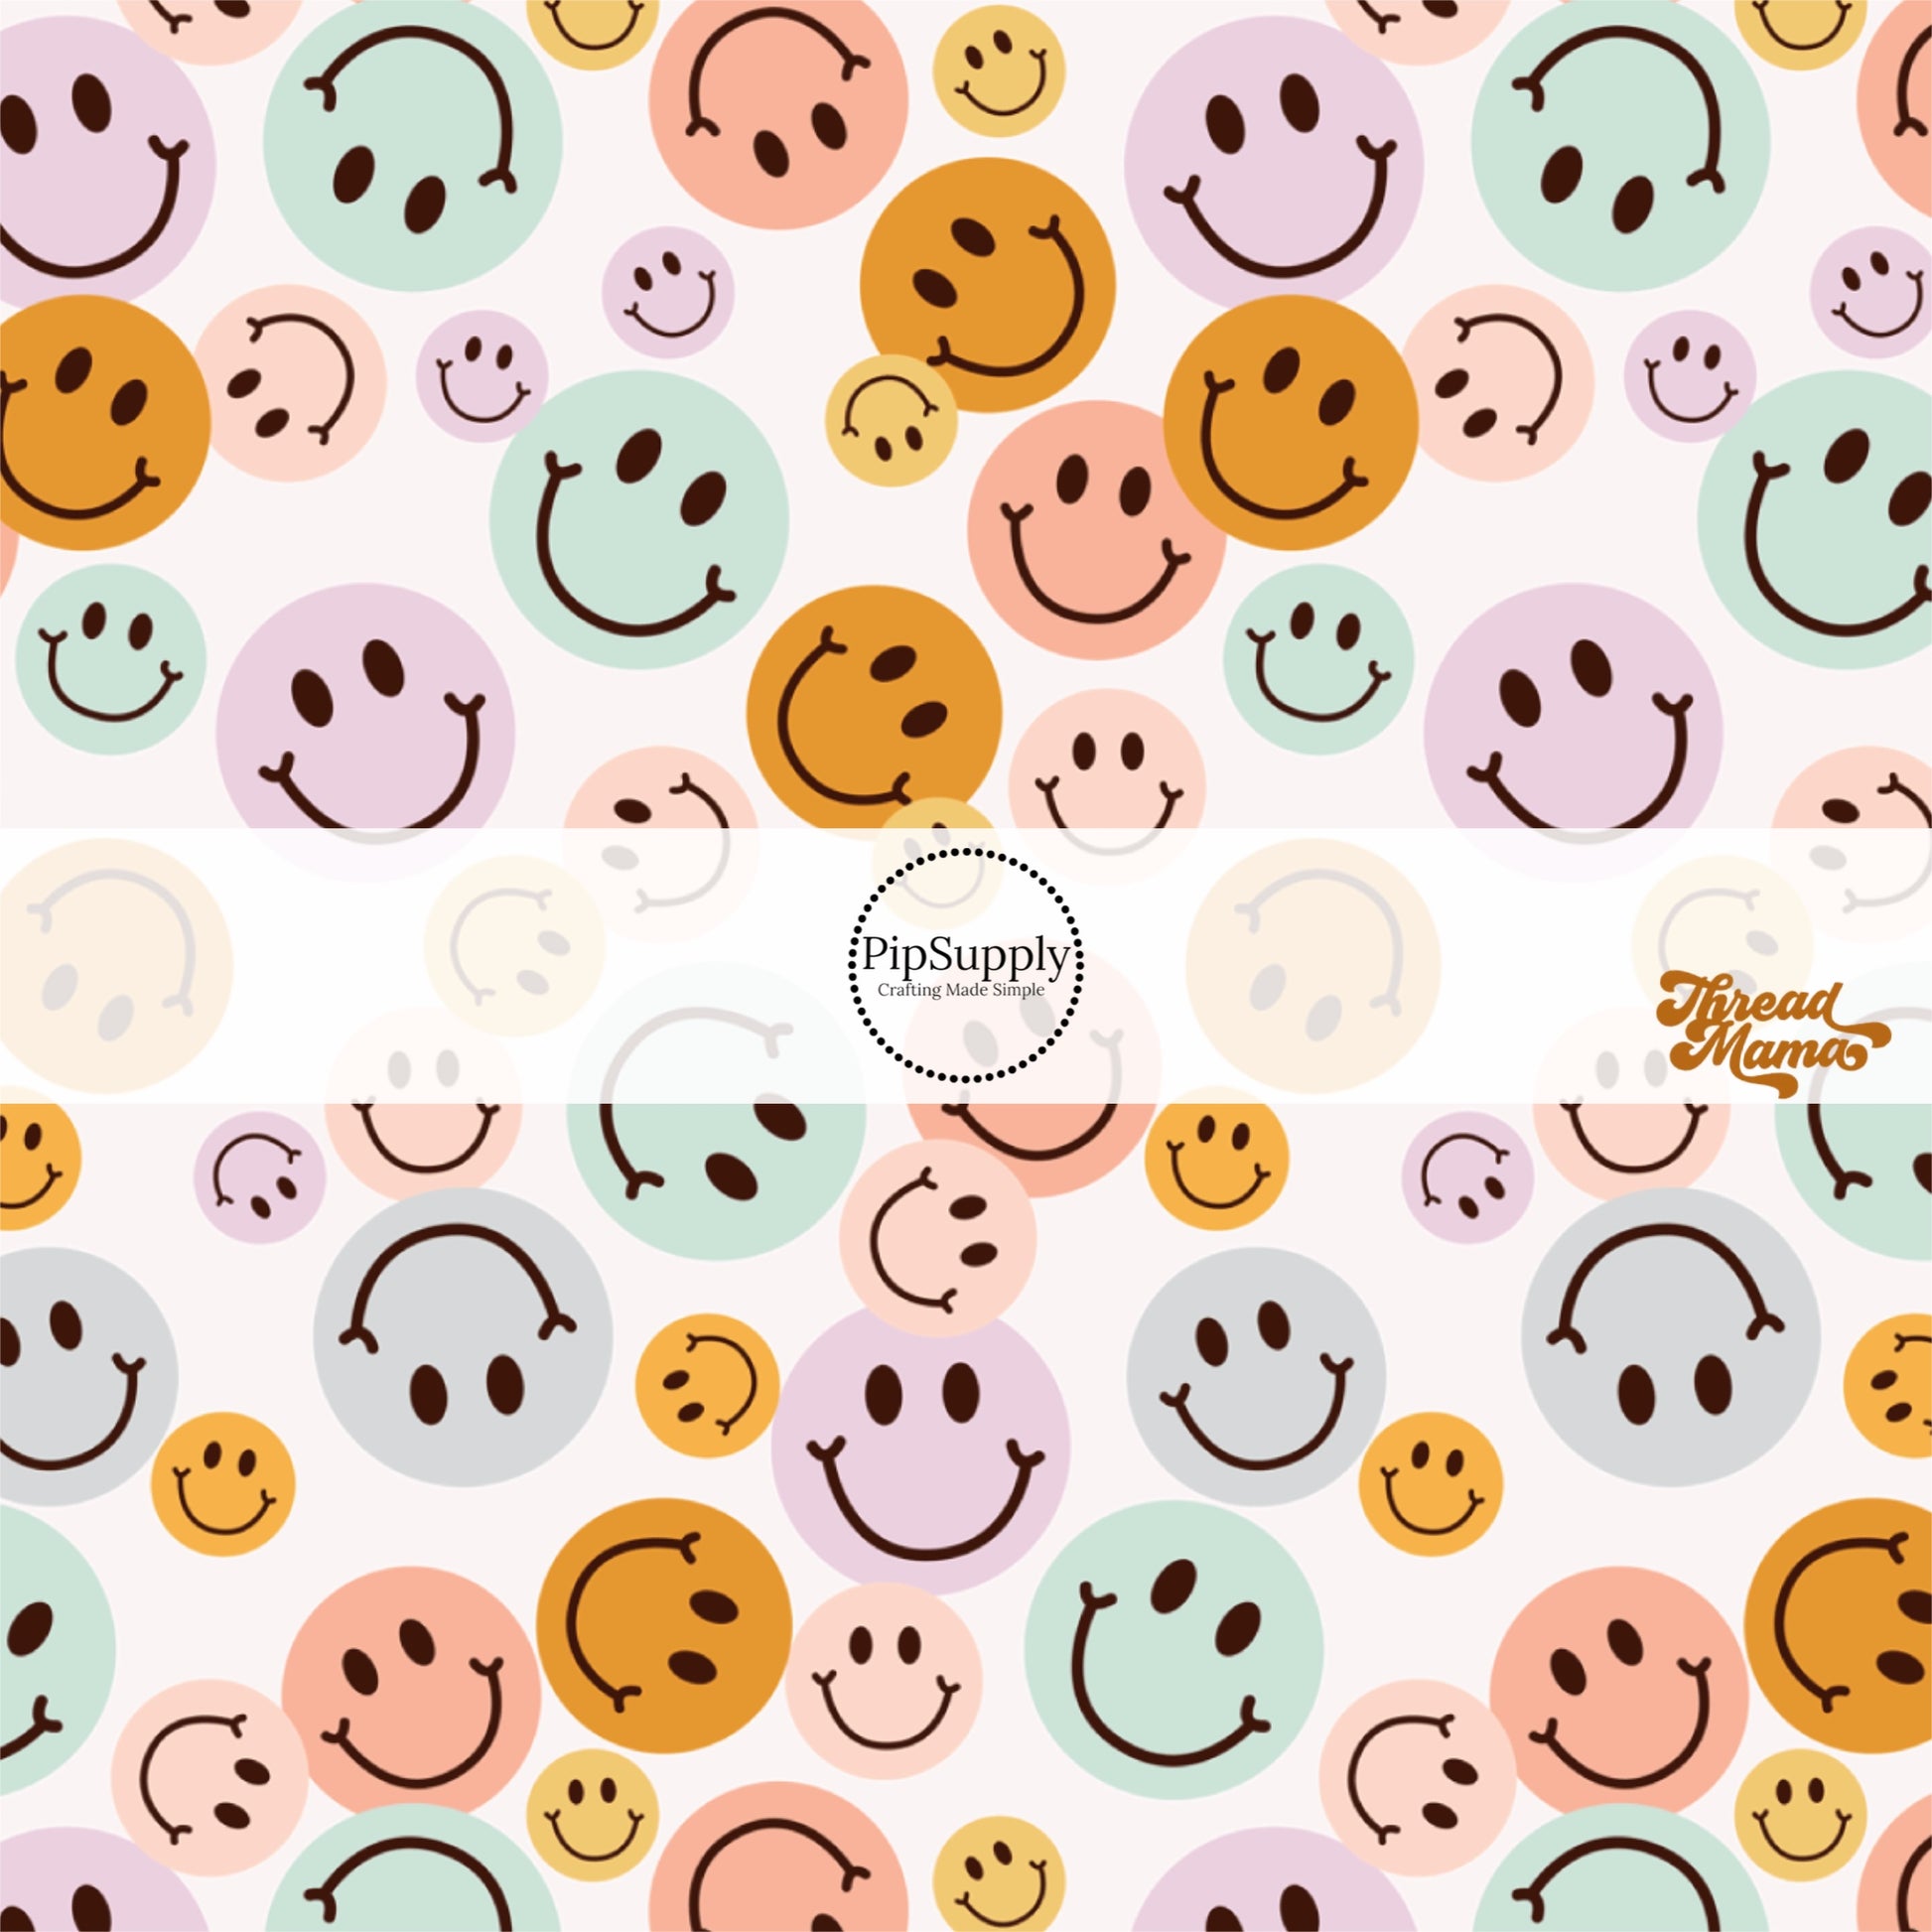 White fabric by the yard with orange, pink, blue, purple, and aqua smiley faces